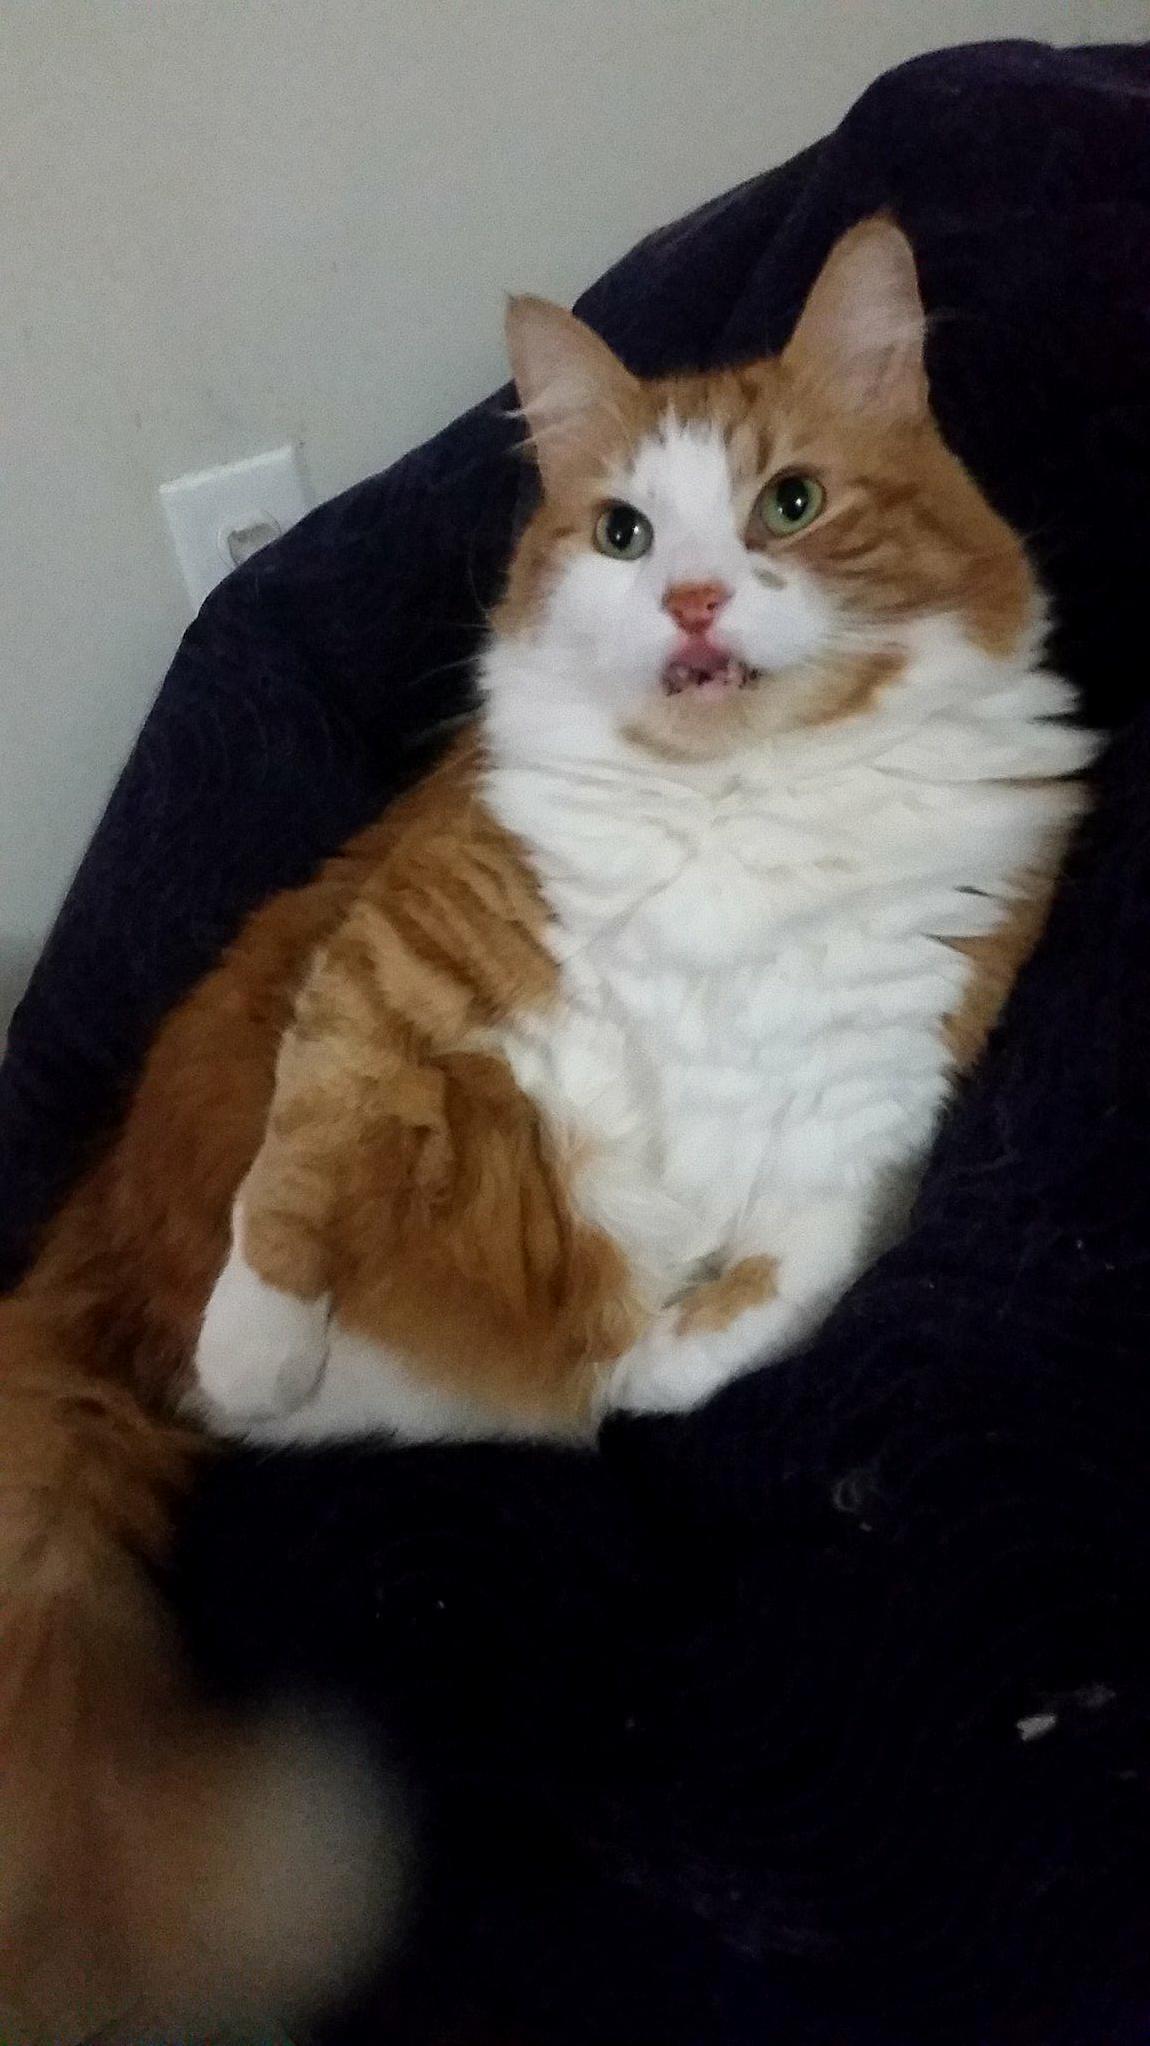 Caligula might be a derp, but hes my derp!